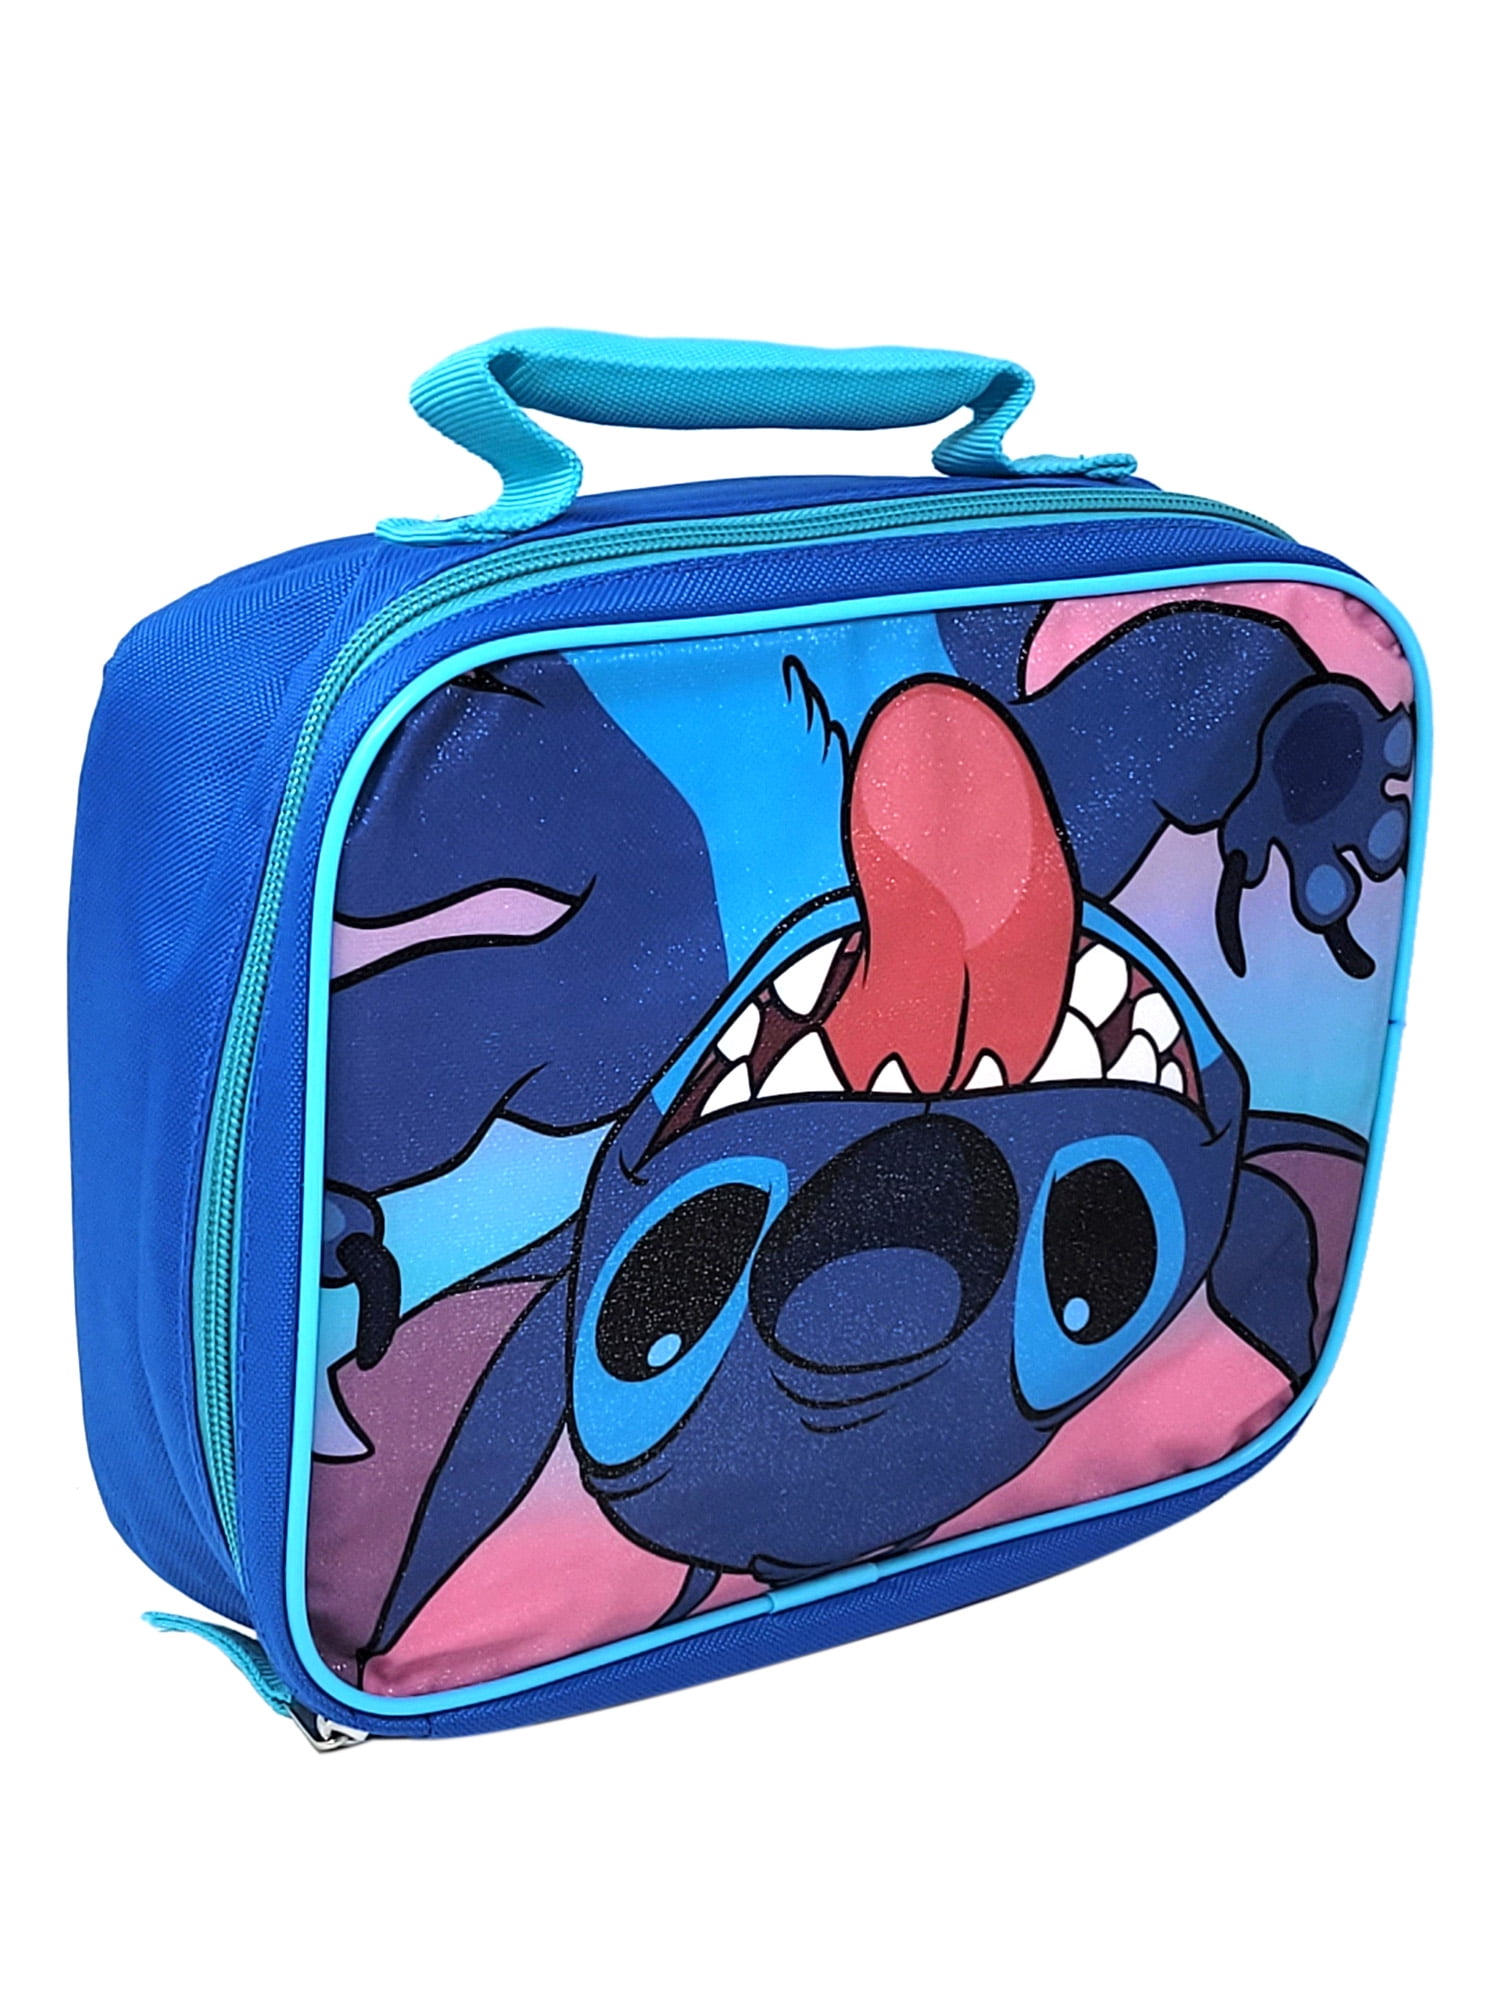 Classic Disney Lilo and Stitch Lunch Bag Bundle For Toddlers Kids - Lilo  and Stitch Insulated Lunch …See more Classic Disney Lilo and Stitch Lunch  Bag